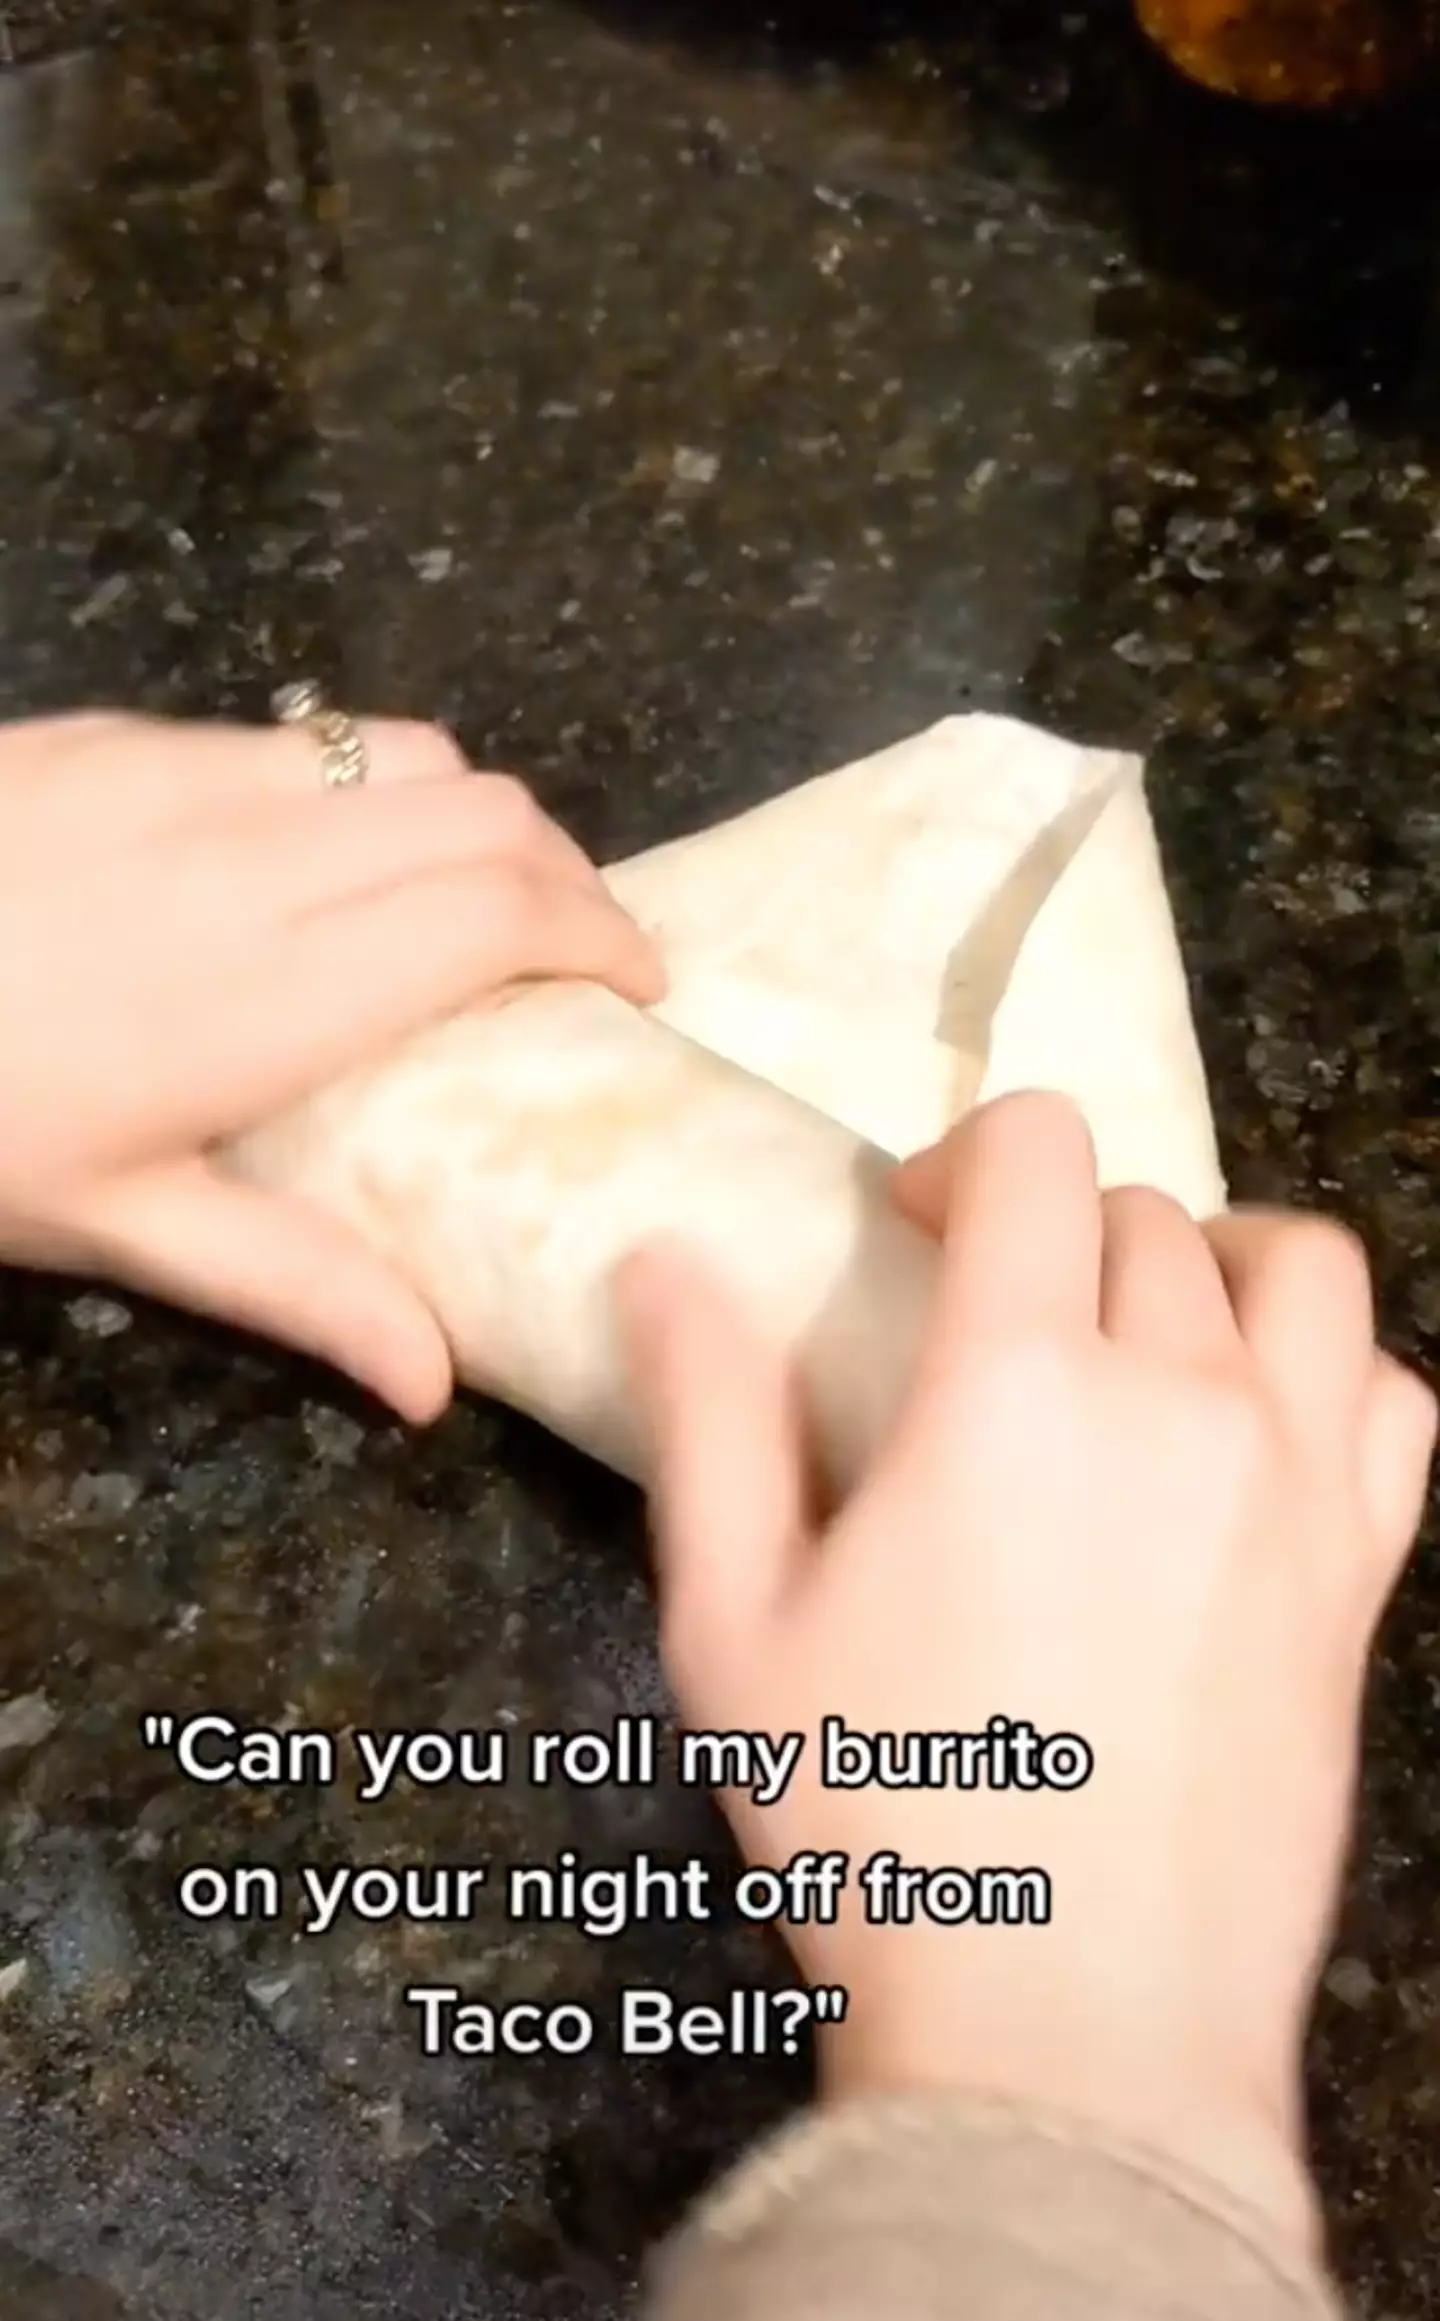 The burrito is then rolled (